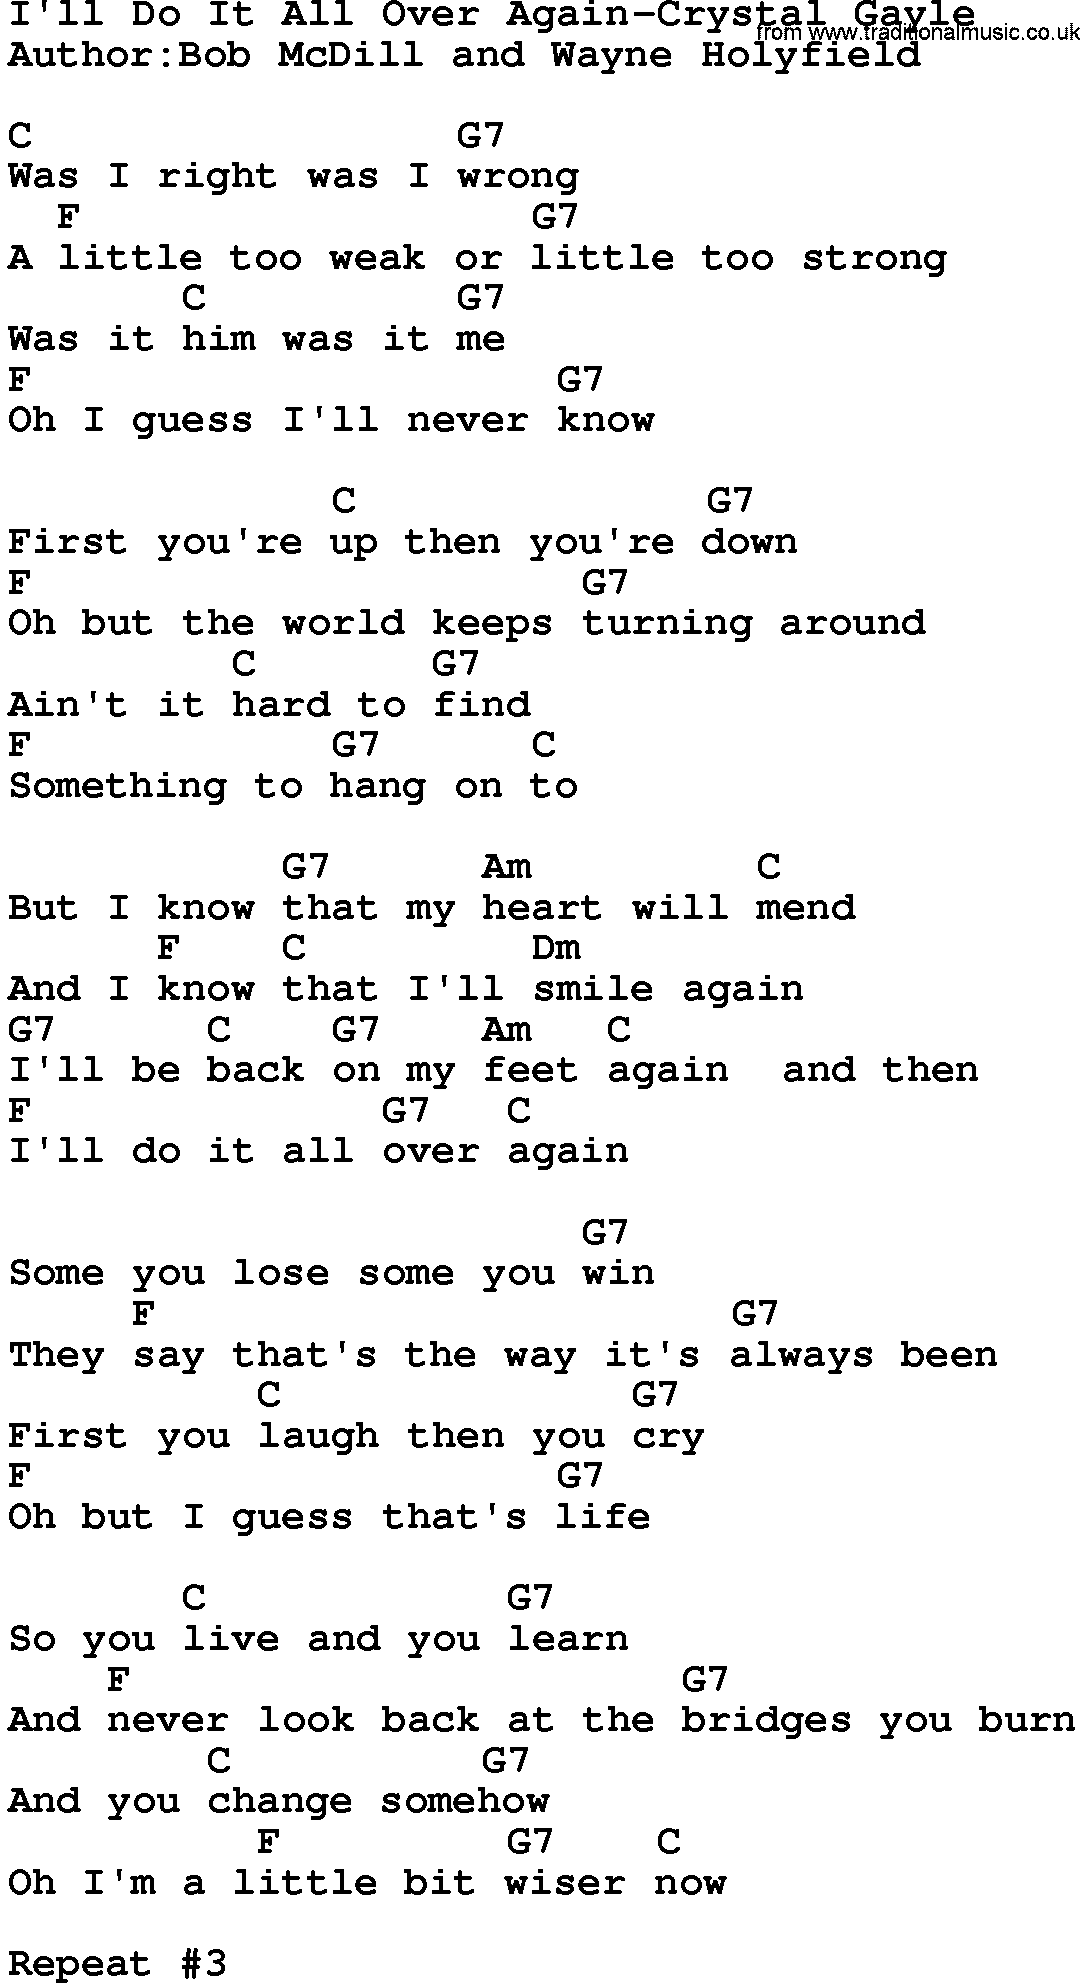 Country music song: I'll Do It All Over Again-Crystal Gayle lyrics and chords